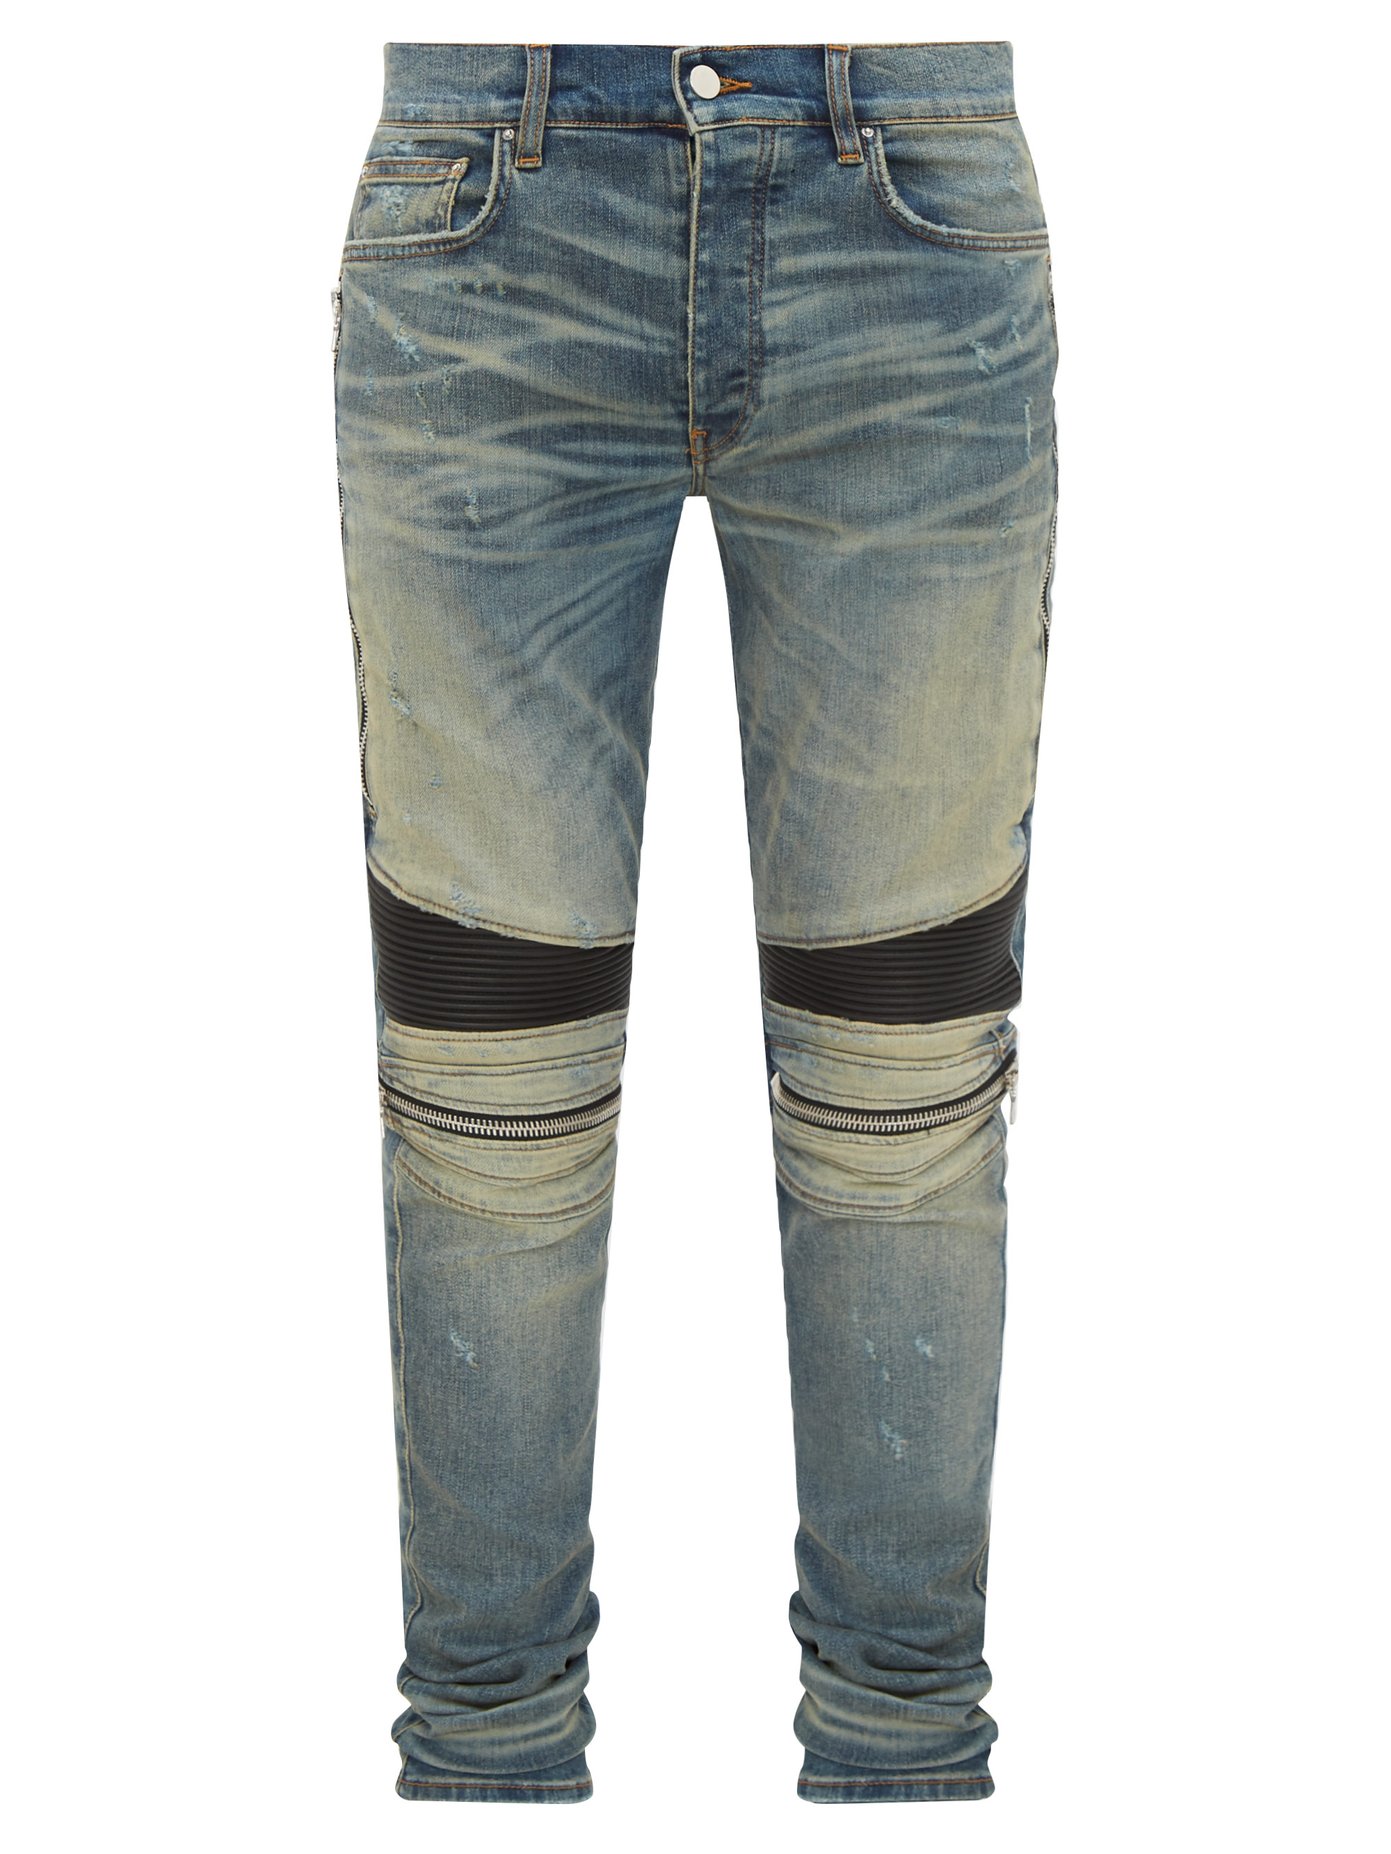 jeans at